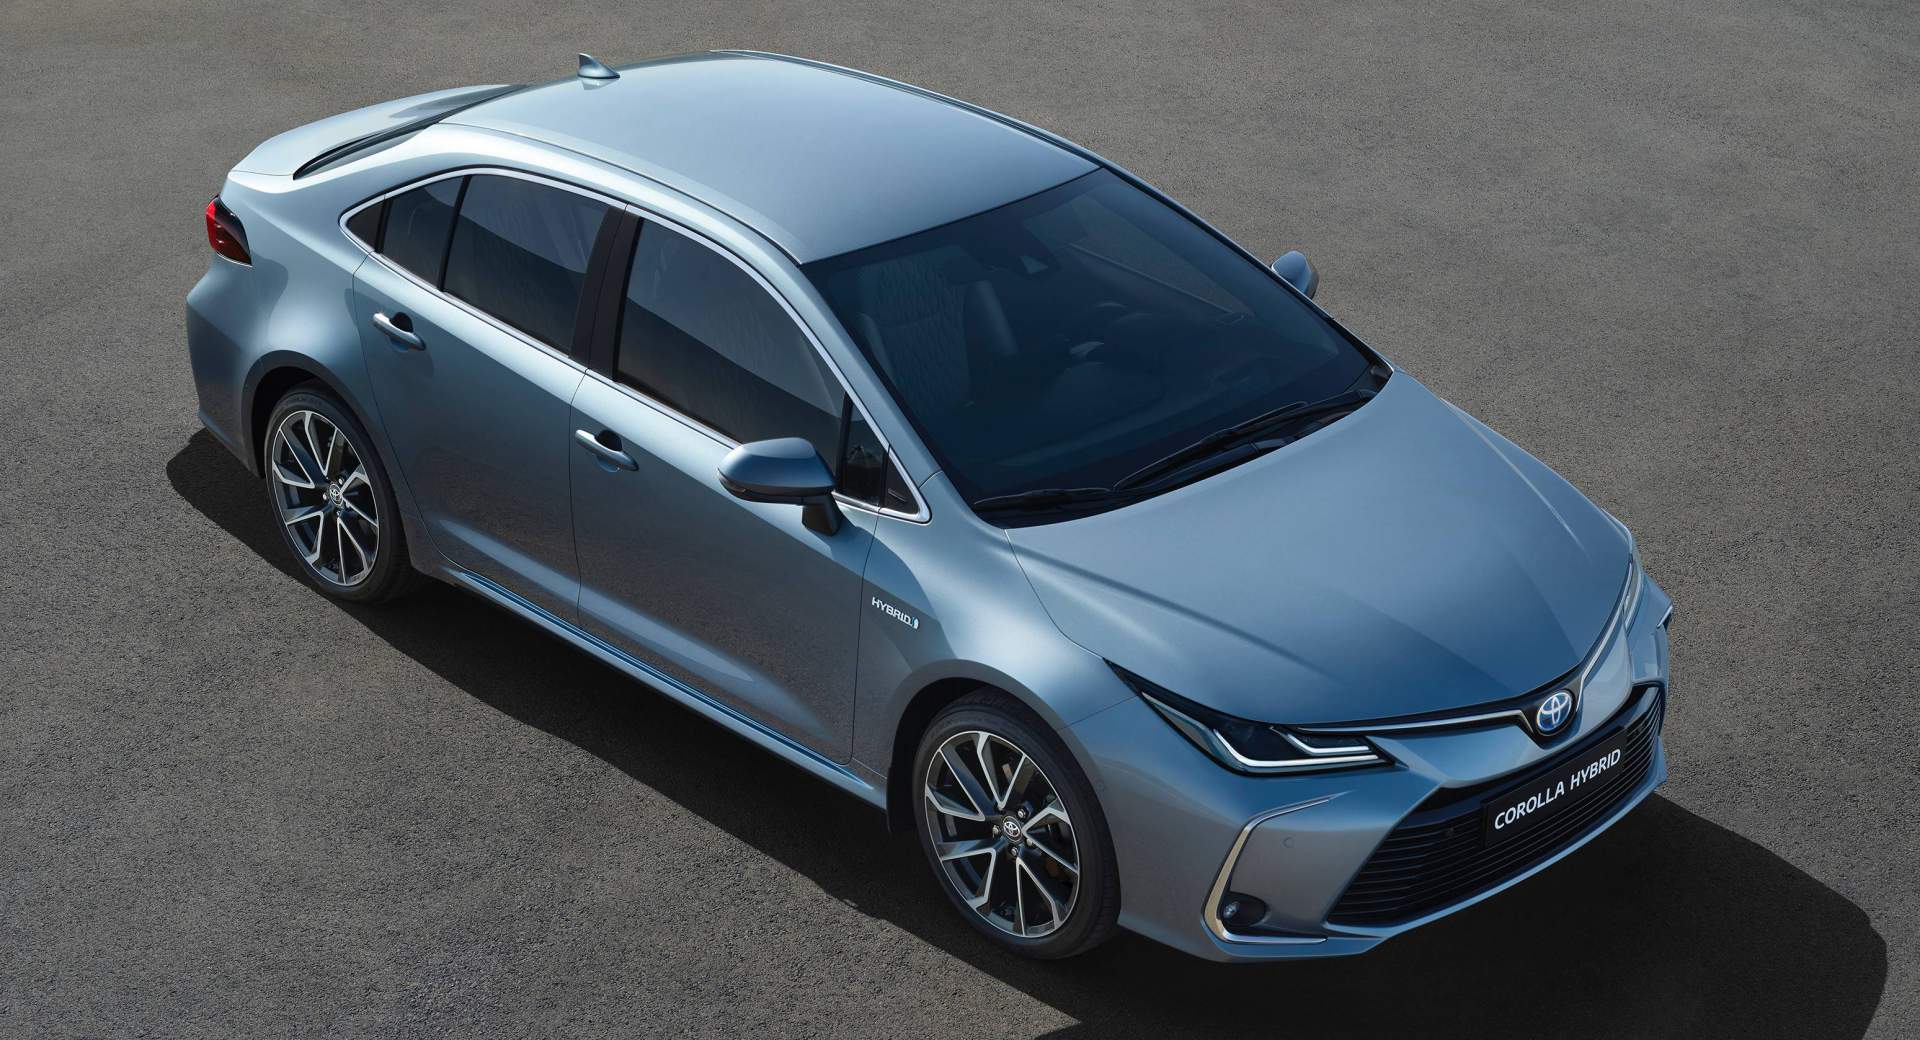 Europe’s 2019 Toyota Corolla Sedan Gains Hybrid Version For The First Time | Carscoops